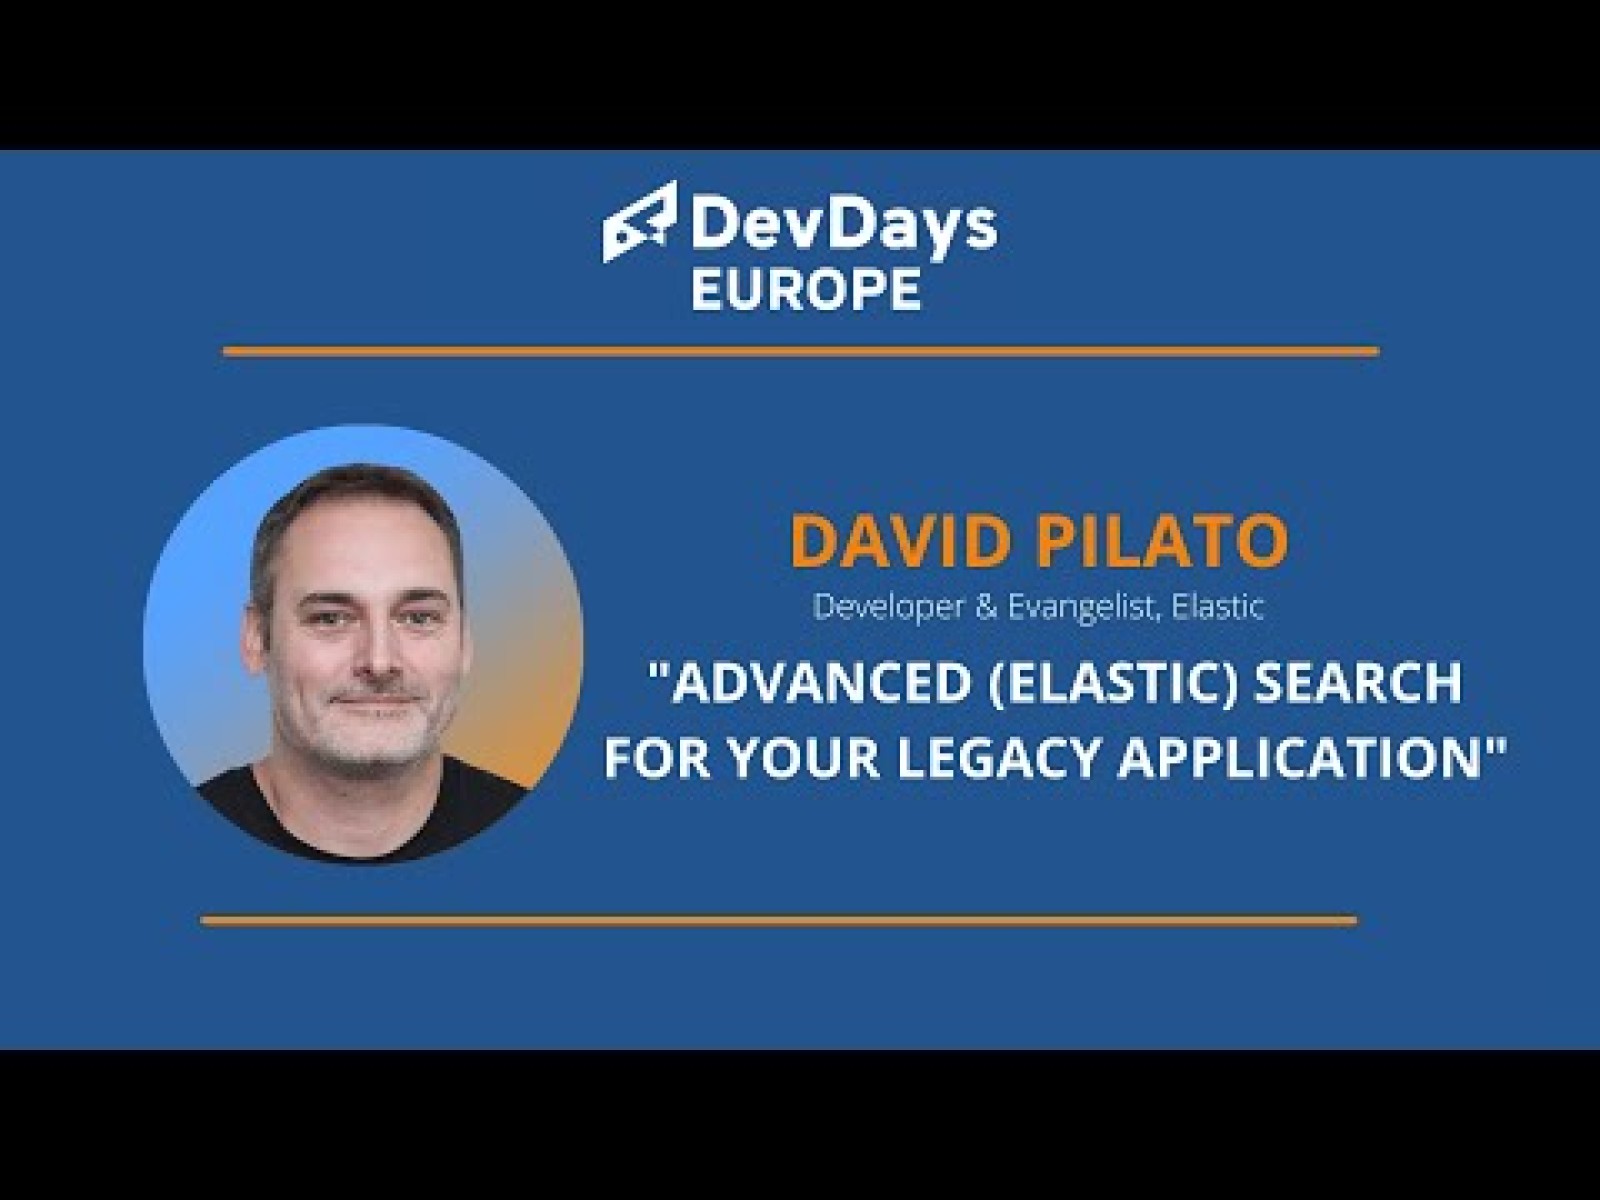 Advanced (elastic)search for your legacy application